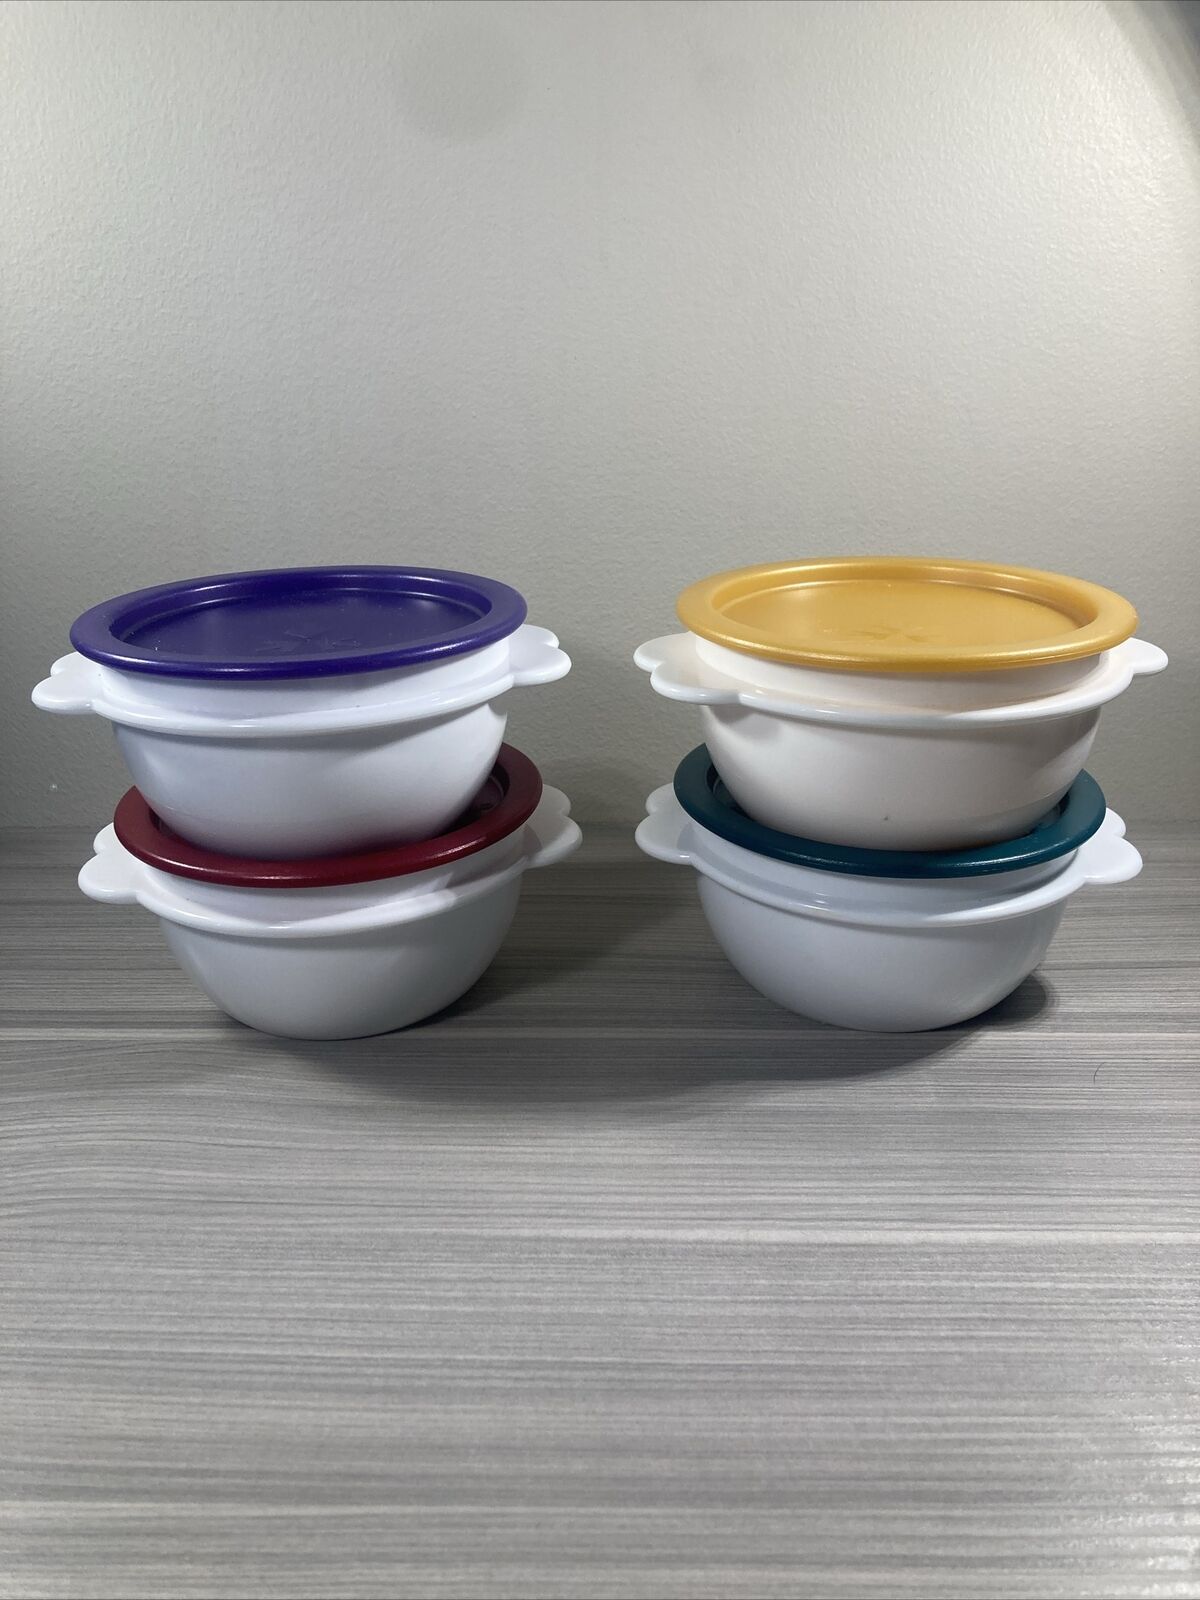 Tupperware Butterfly Bowls White (Set of 4) One Touch Jewel Tone Seals Bowl New